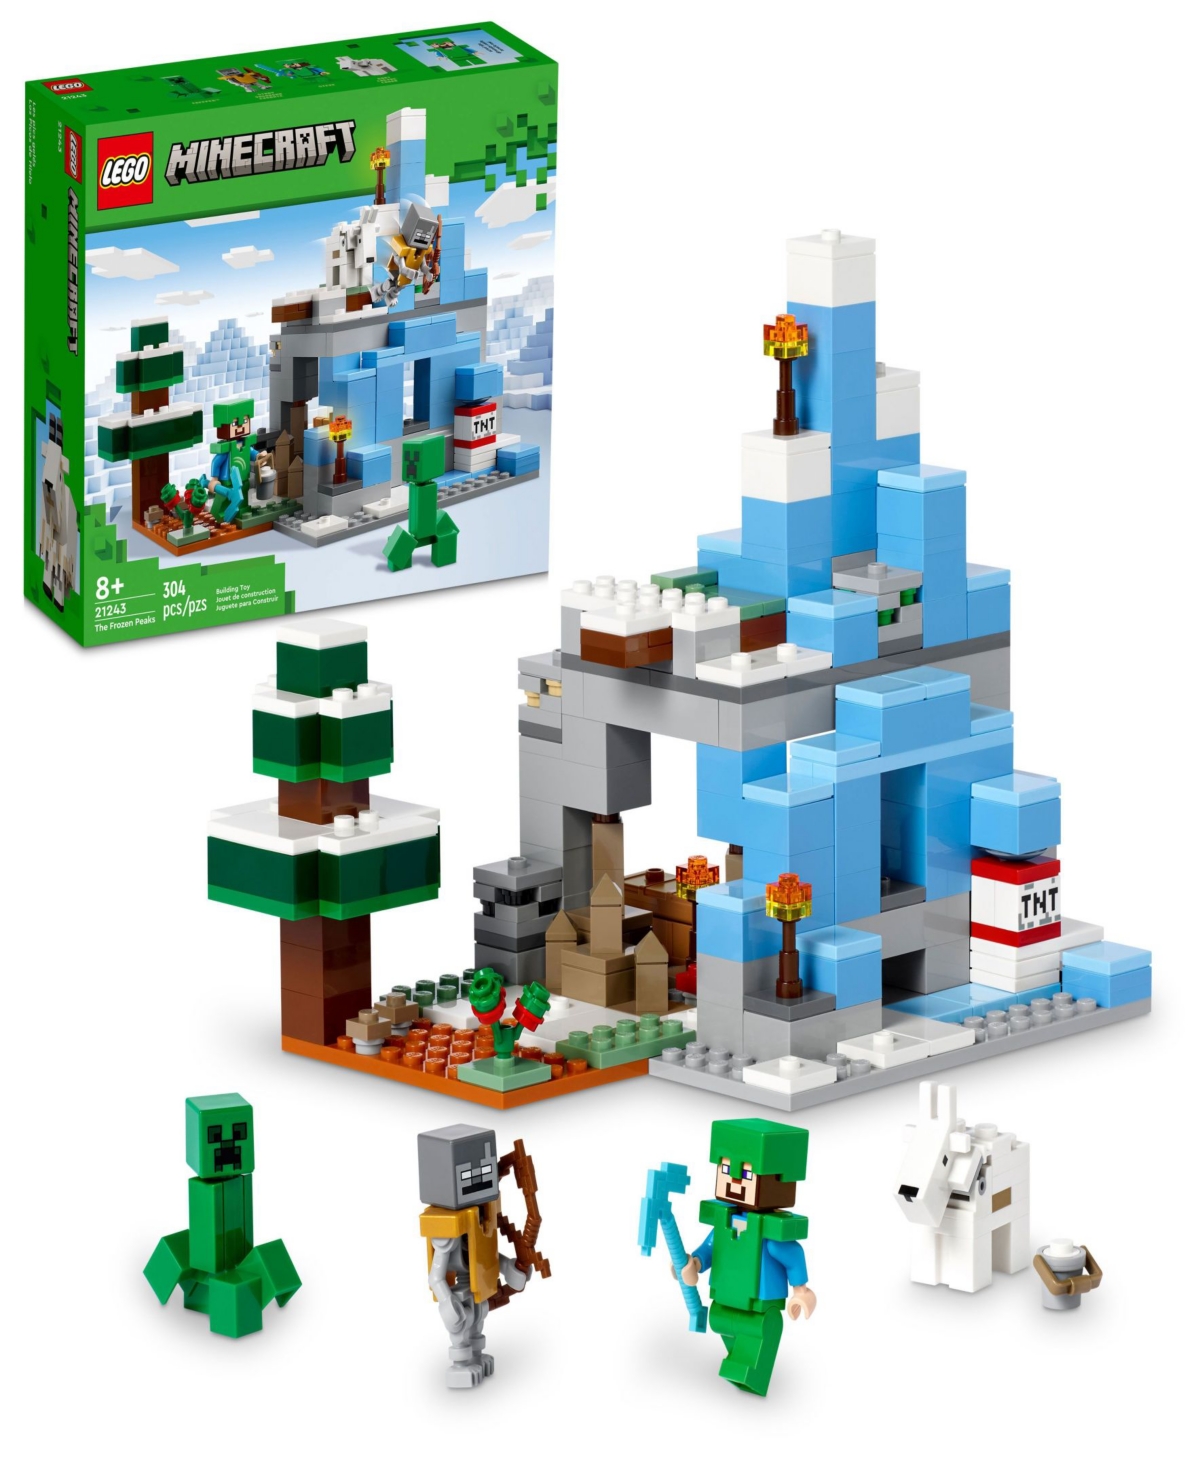 Lego Minecraft The Frozen Peaks 21243 Toy Building Set With Steve, Creeper, Stray And Goat Figures In Multicolor